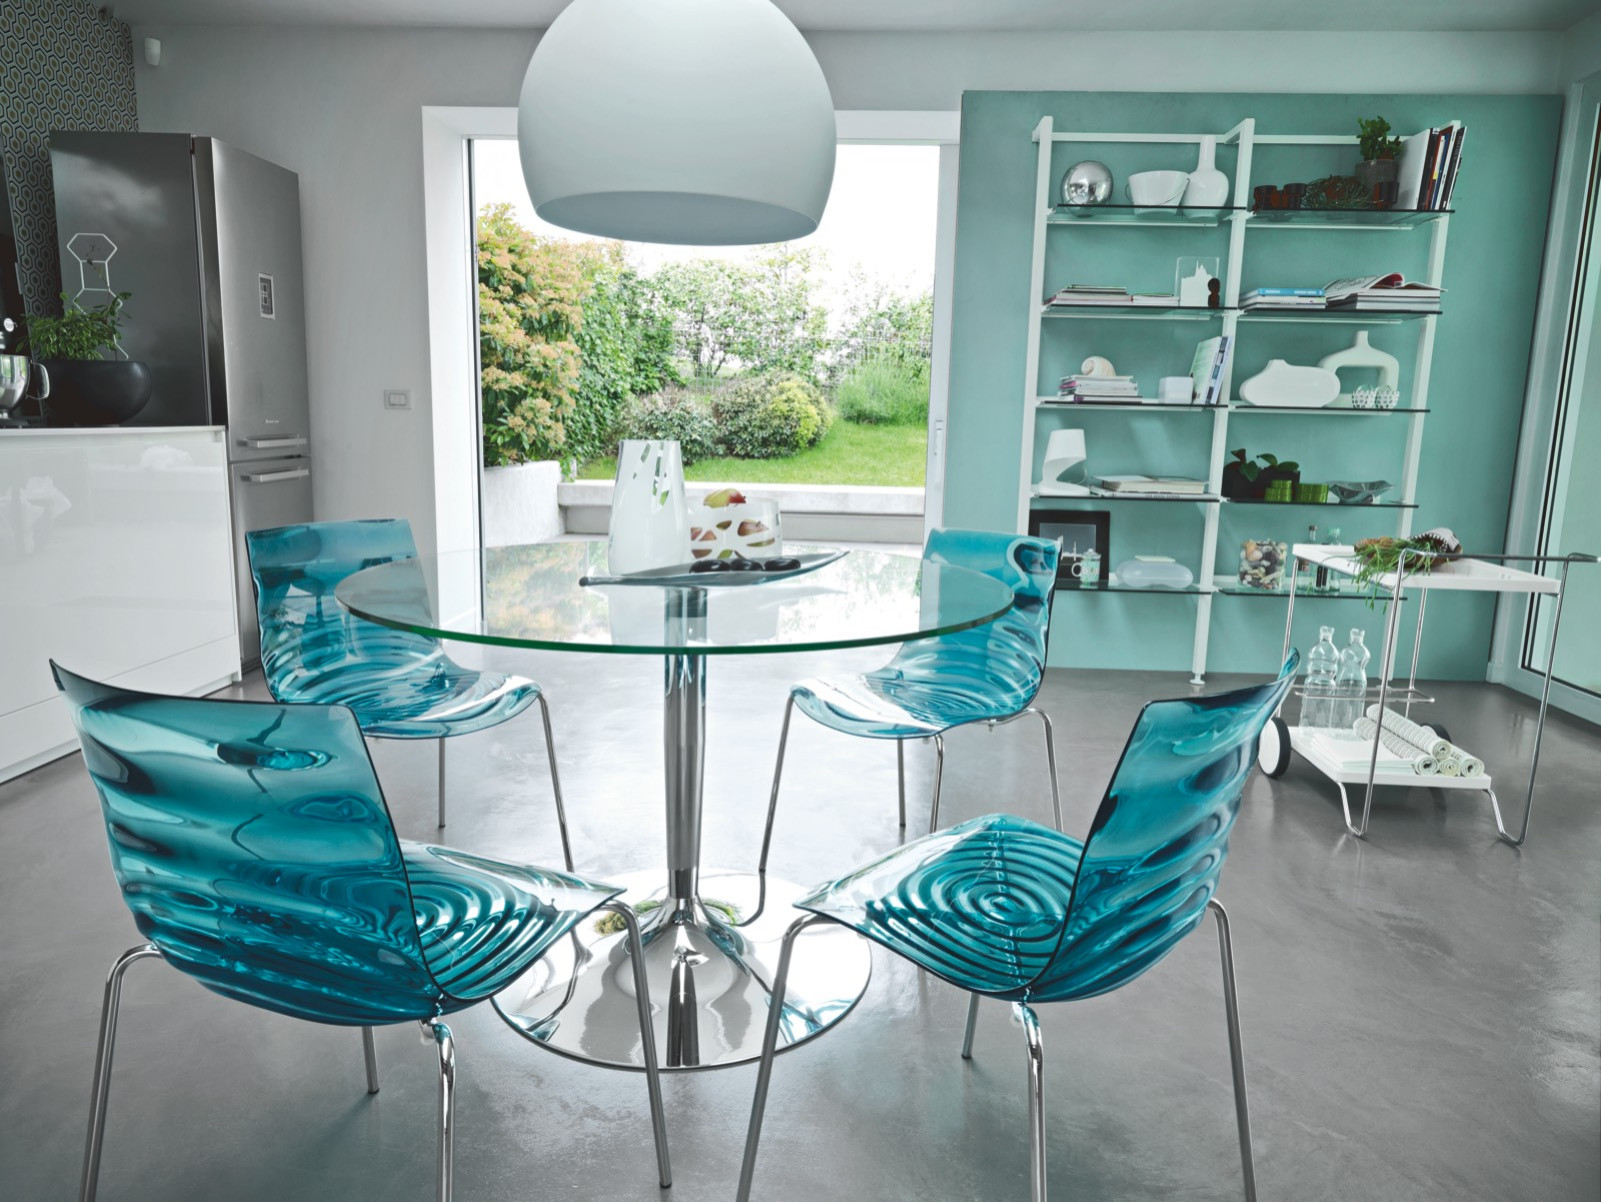 Calligaris Planet Table and L'Eau Chairs - Contemporary - Dining Room - San  Diego - by Hold It Contemporary Home | Houzz